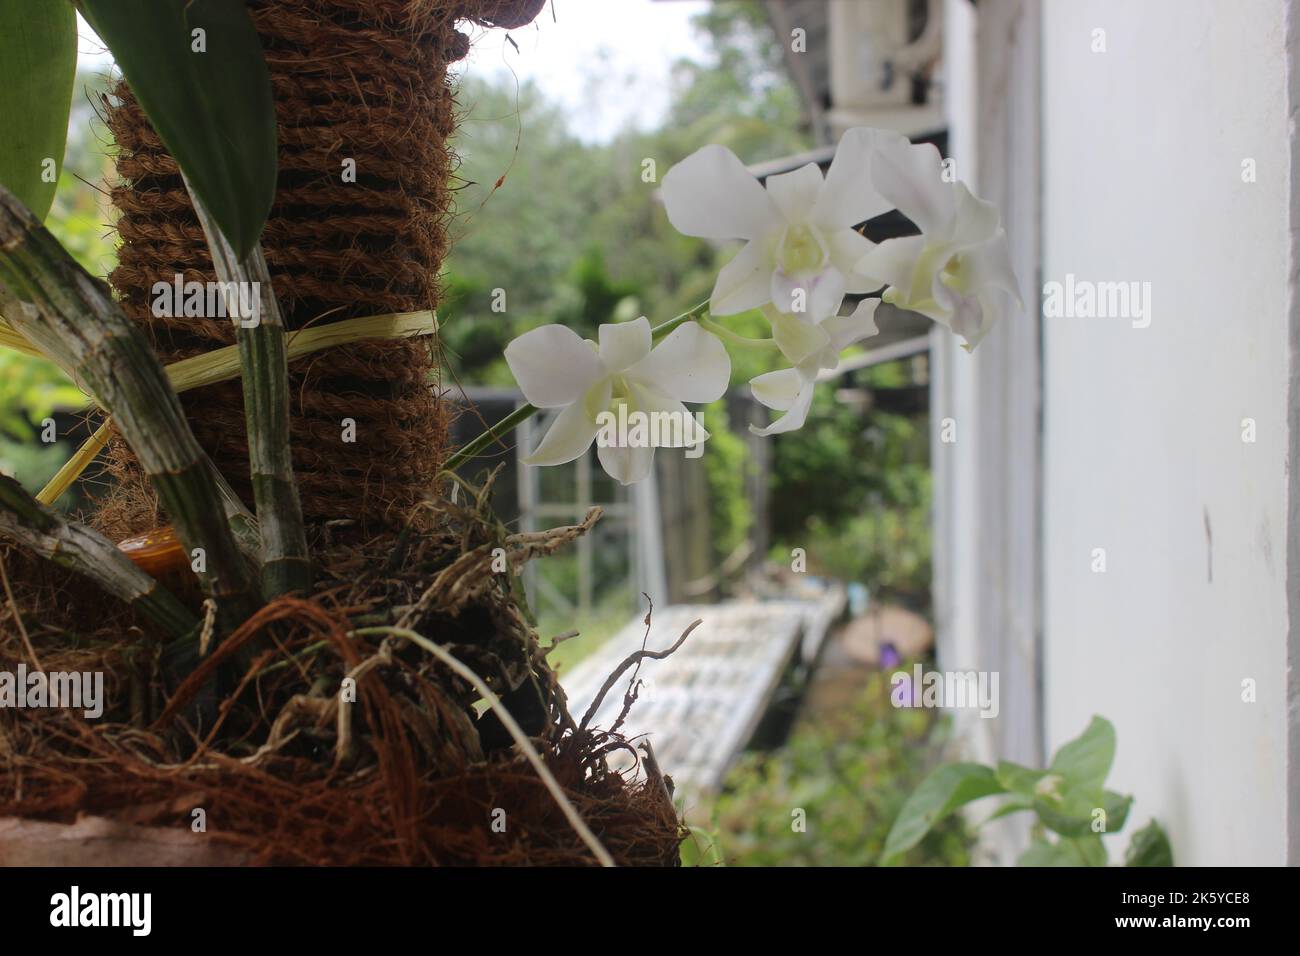 Selective focus of beautiful white dendrobium nobile orchid flower in garden on blurred background. Stock Photo